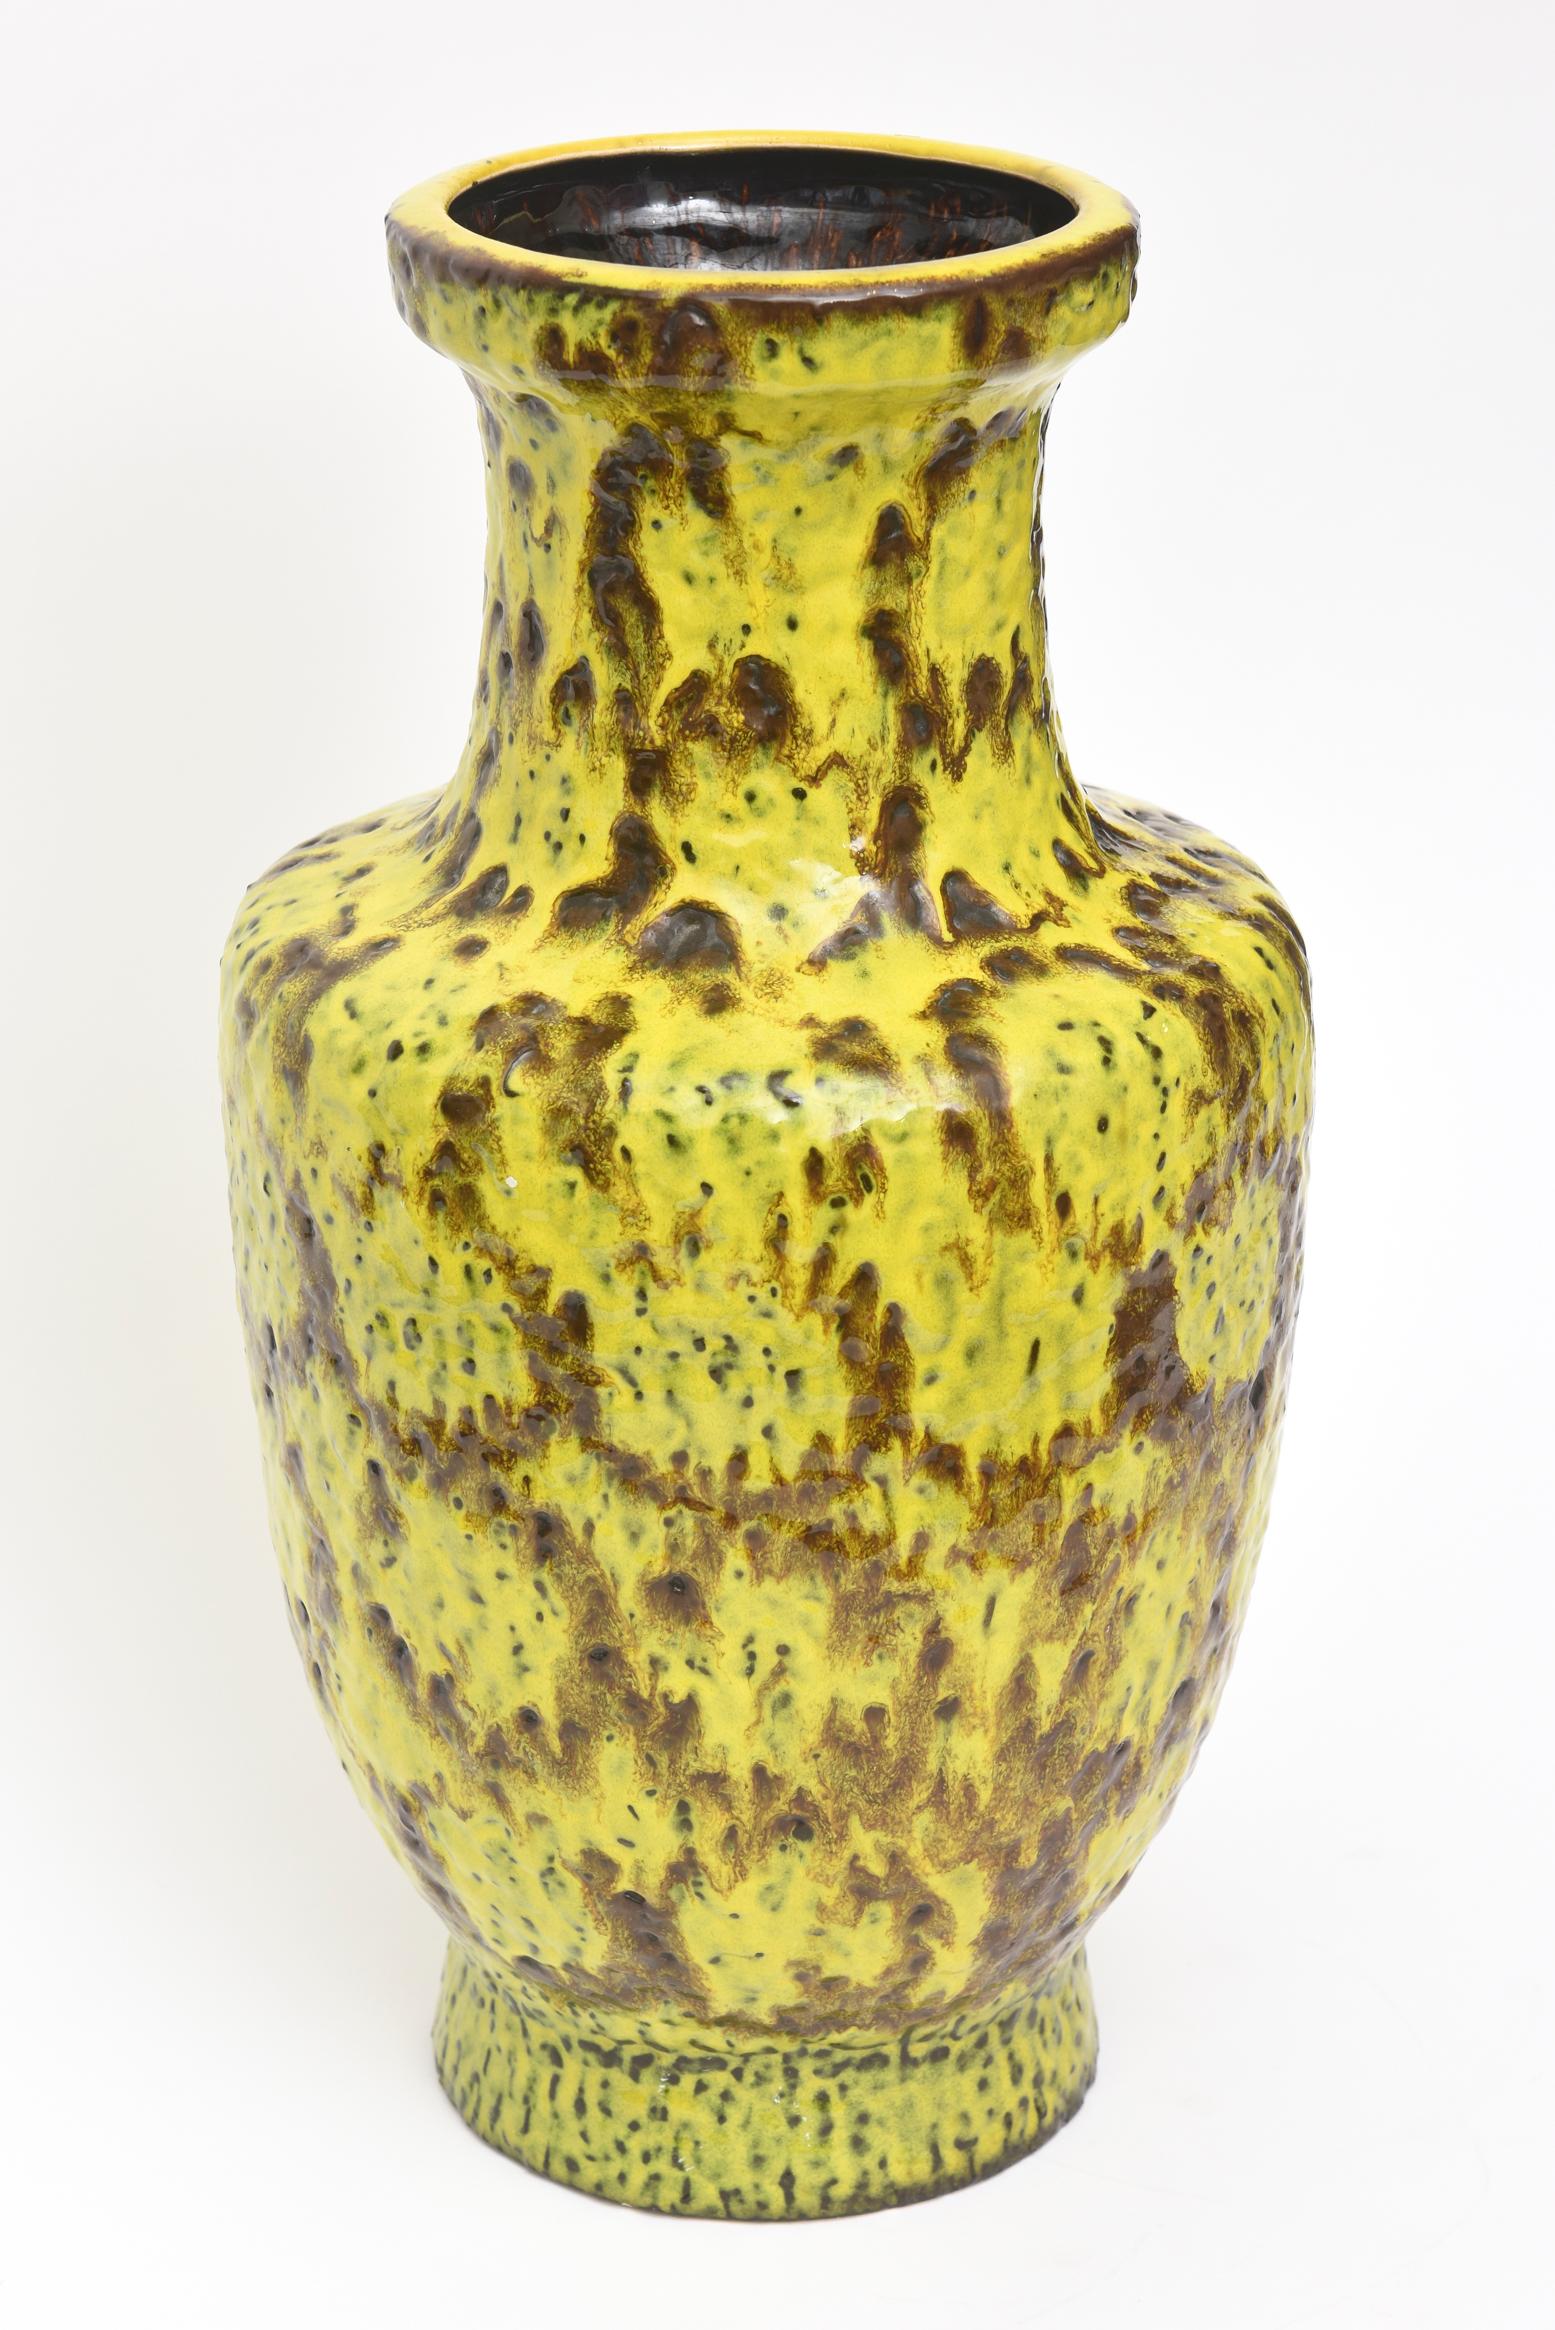 This gorgeous and monumental tall German Mid-Century Modern Bay Keramik molten fat glazed marbled ceramic vase or vessel sculpture has luscious colors of chartreuse yellow green and brown. It makes a statement and is signed on the bottom Bay W